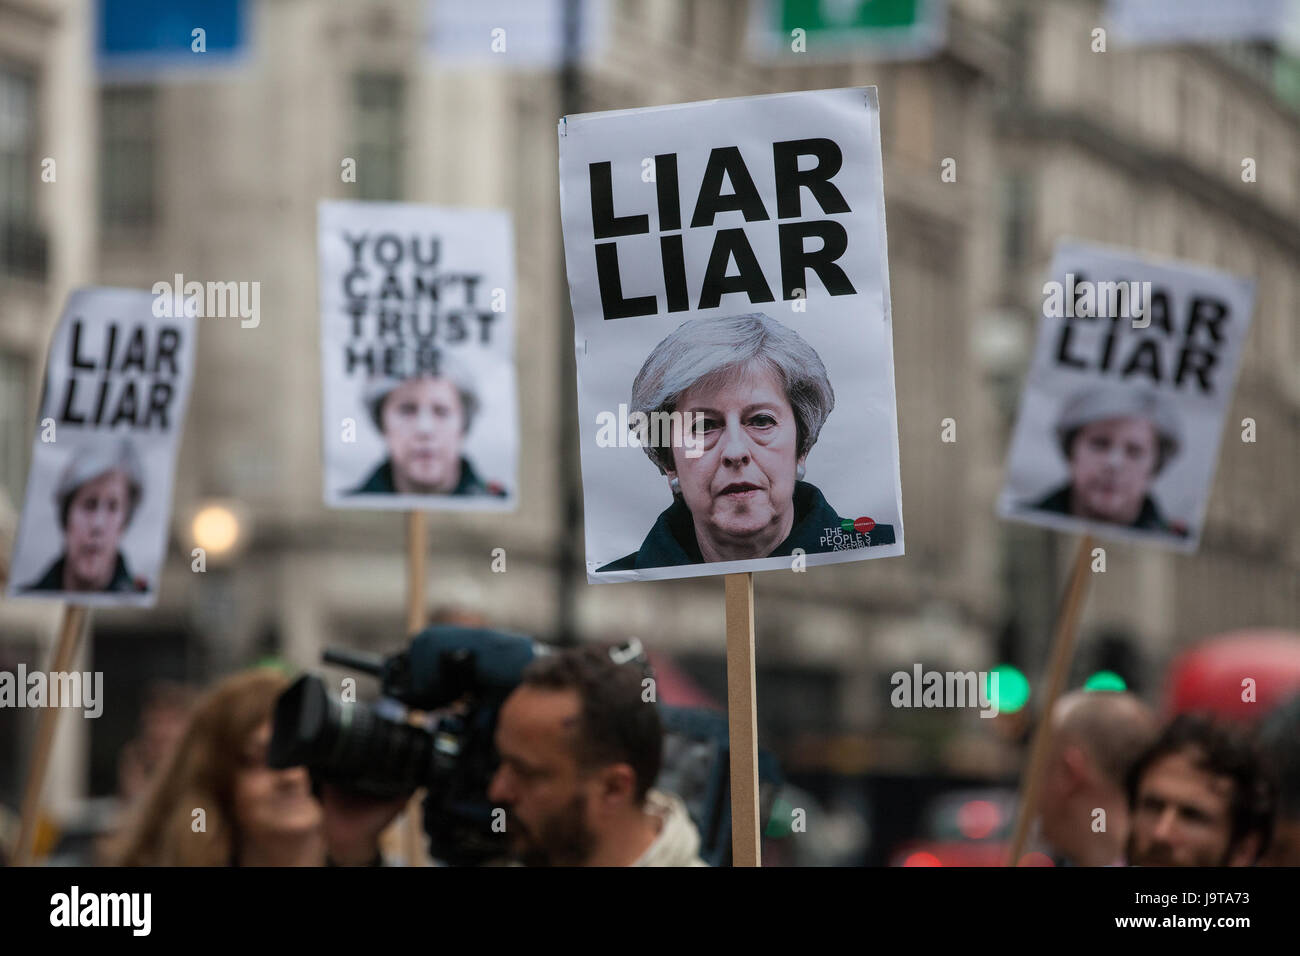 London, UK. 2nd June, 2017. Activists from the People's Assembly protest outside Broadcasting House during the broadcast of the Chart Show against the BBC's refusal to play on the radio a song by Captain Ska about Prime Minister Theresa May called 'Liar Liar'.  The BBC is refusing to play the song on the grounds that it must remain impartial during a general election campaign. Credit: Mark Kerrison/Alamy Live News Stock Photo